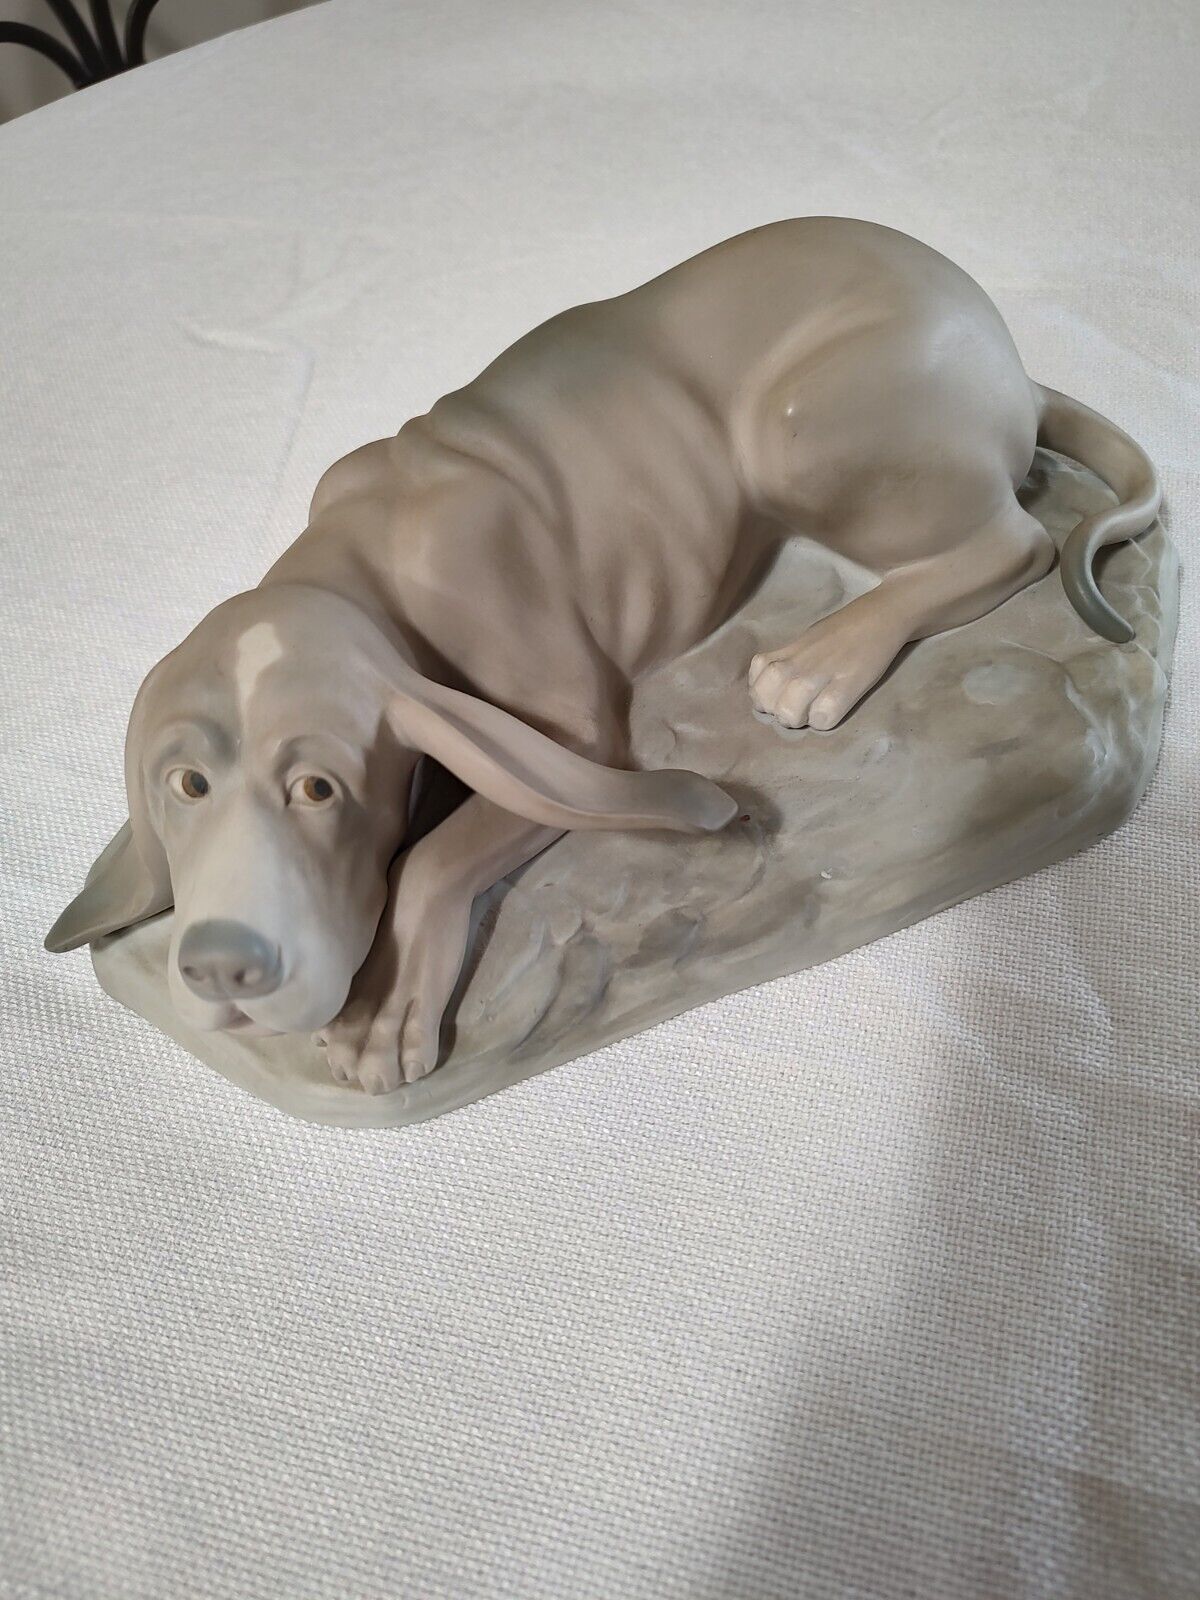 NAO HOUND DOG FIGURINE LARGE (LLADRO) SAD FACE 10 INCHES LONG TAN AND GRAY COLOR